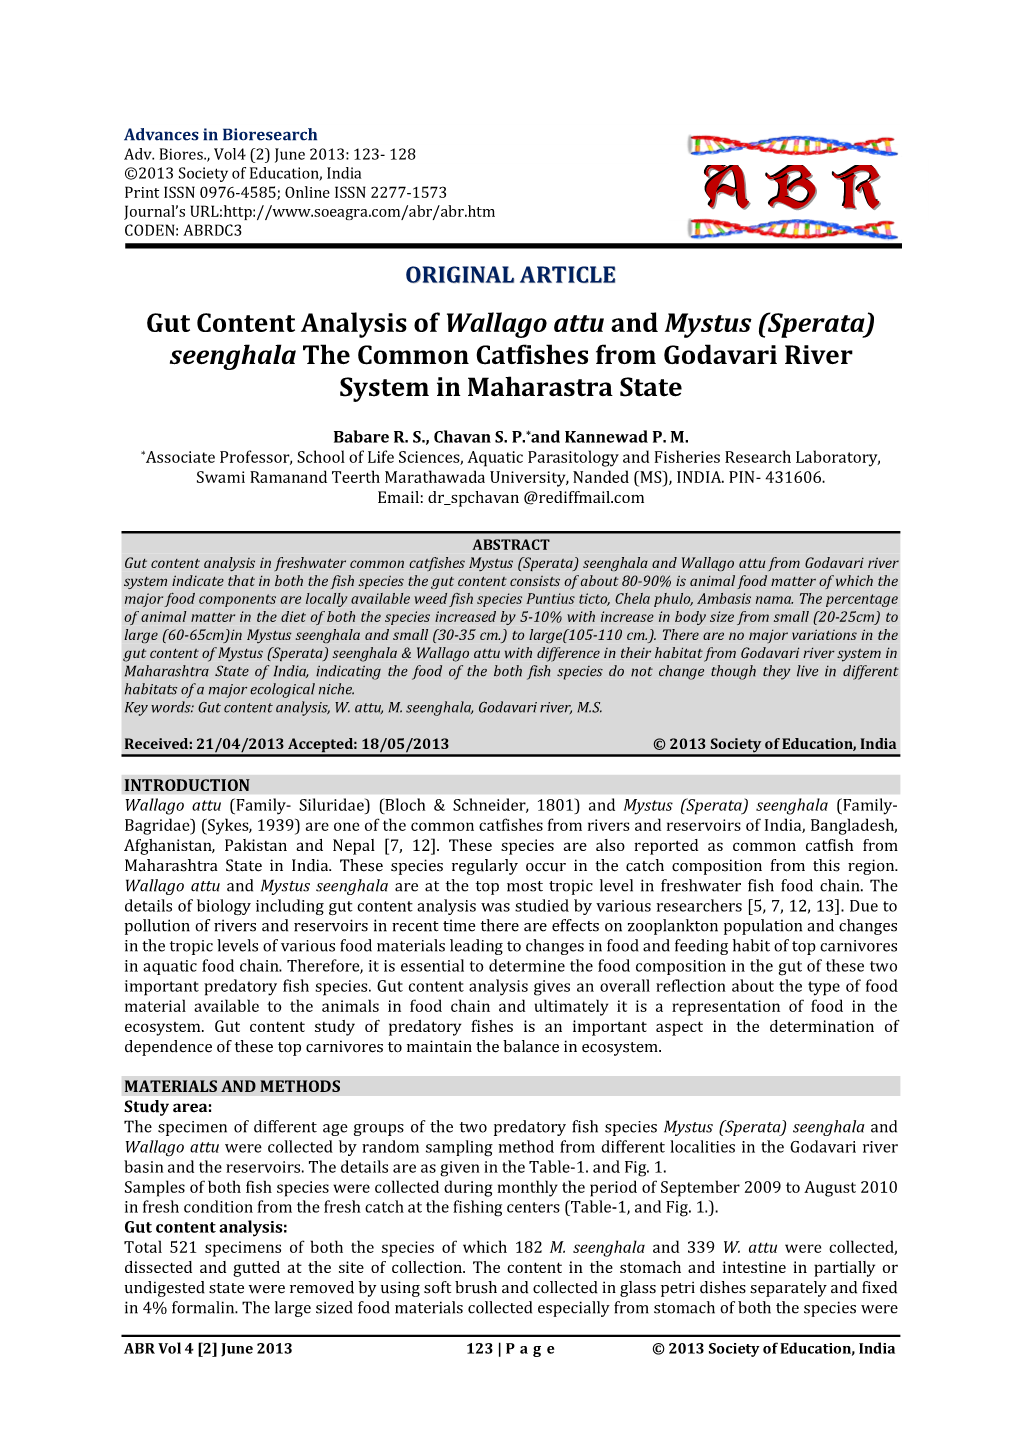 Gut Content Analysis of Wallago Attu and Mystus (Sperata) Seenghala the Common Catfishes from Godavari River System in Maharastra State